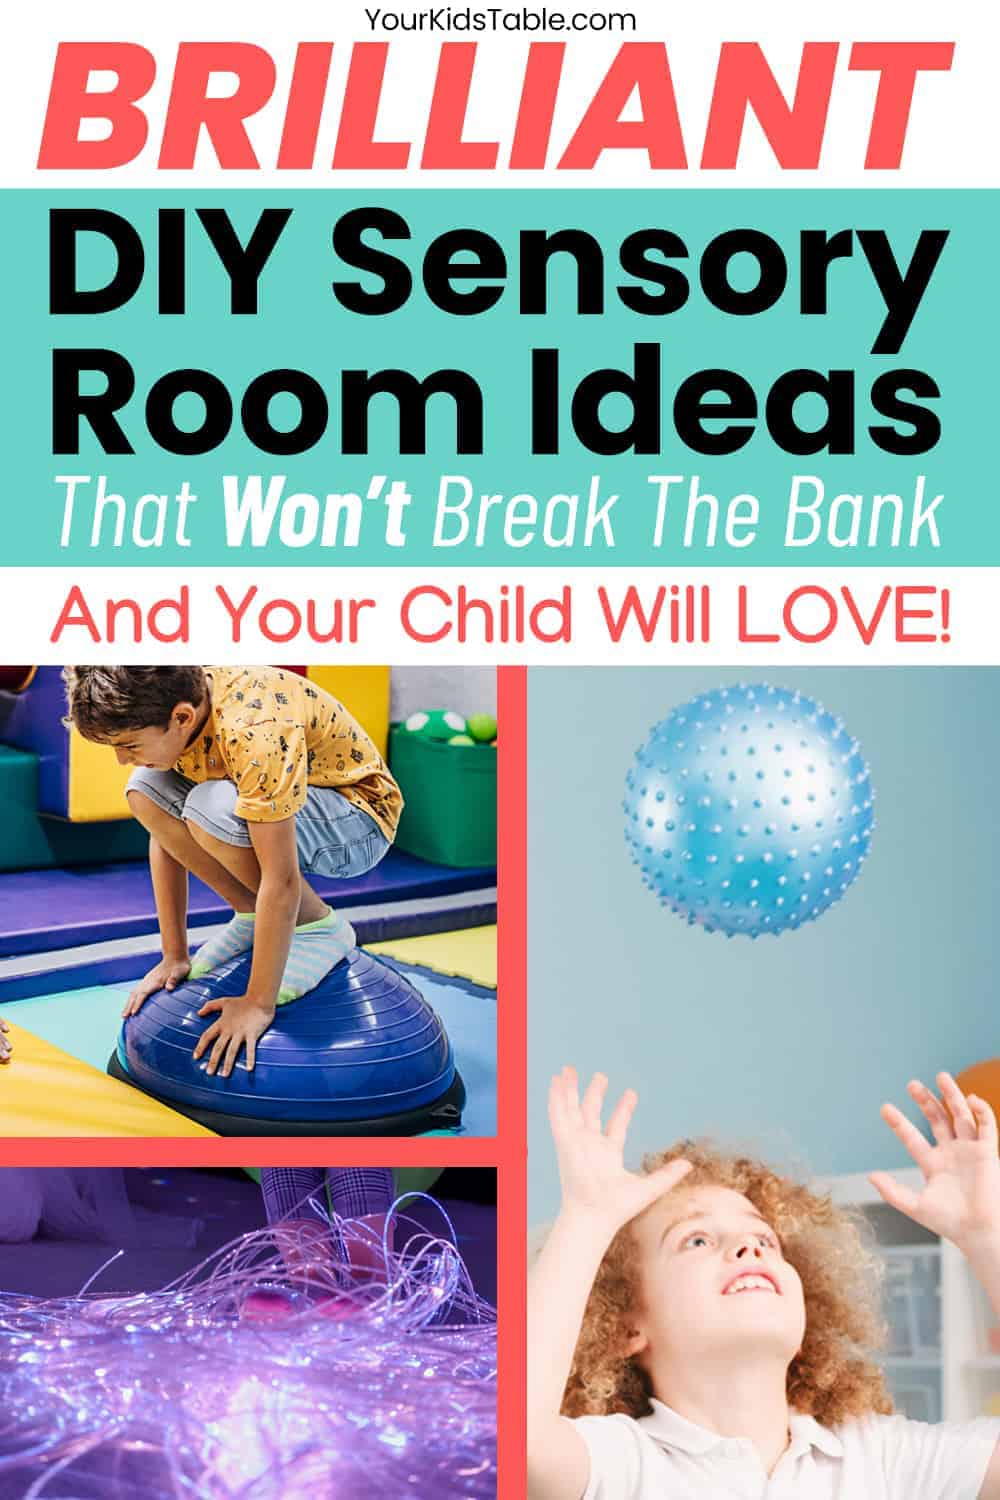 The Top 5 Benefits to Creating a Sensory Room in School, at Home